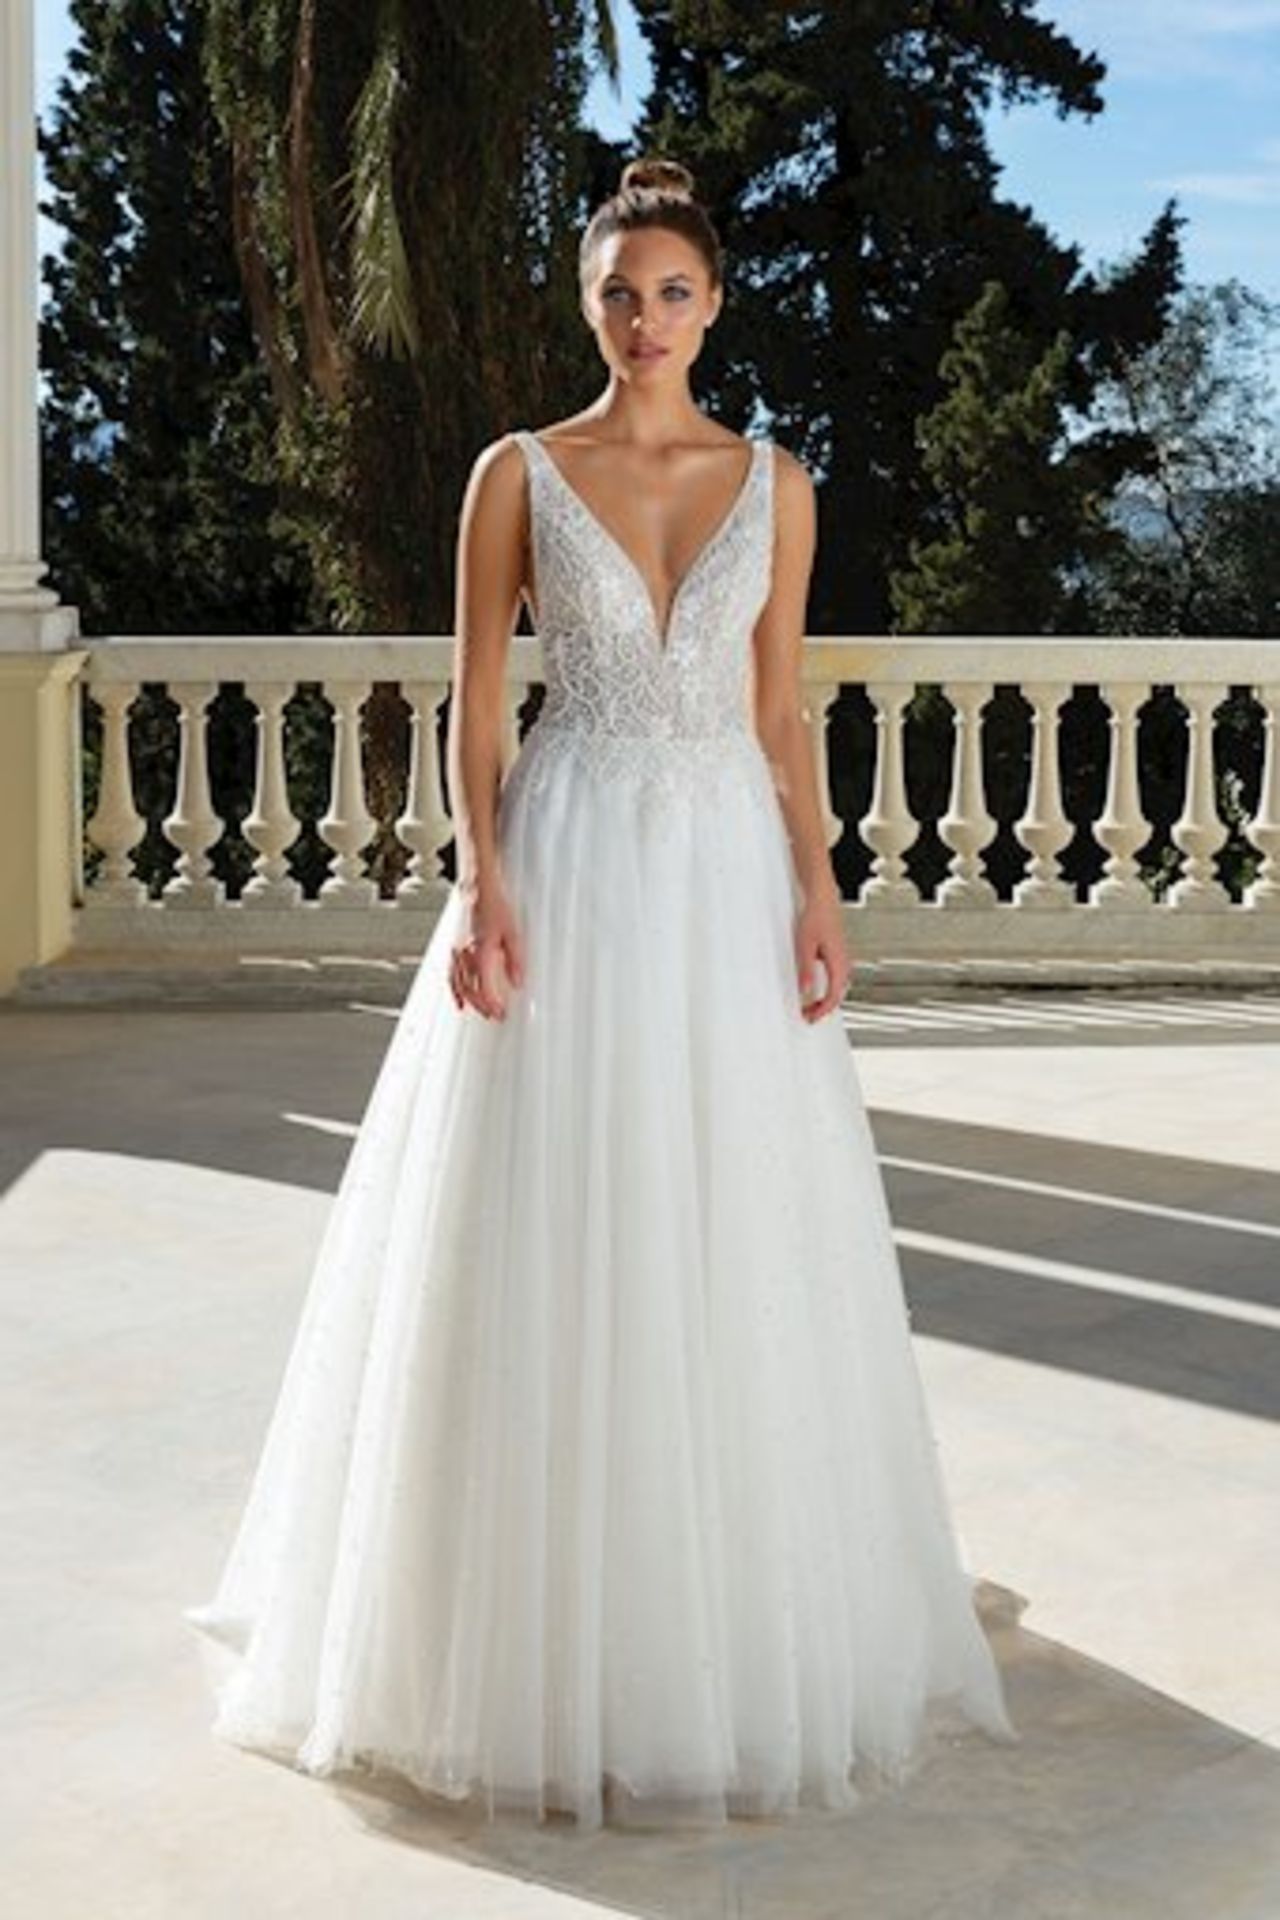 1 x Justin Alexander Designer Wedding Dress With Embroidered Bodice - Size 12 - RRP £1,600 - Image 5 of 8